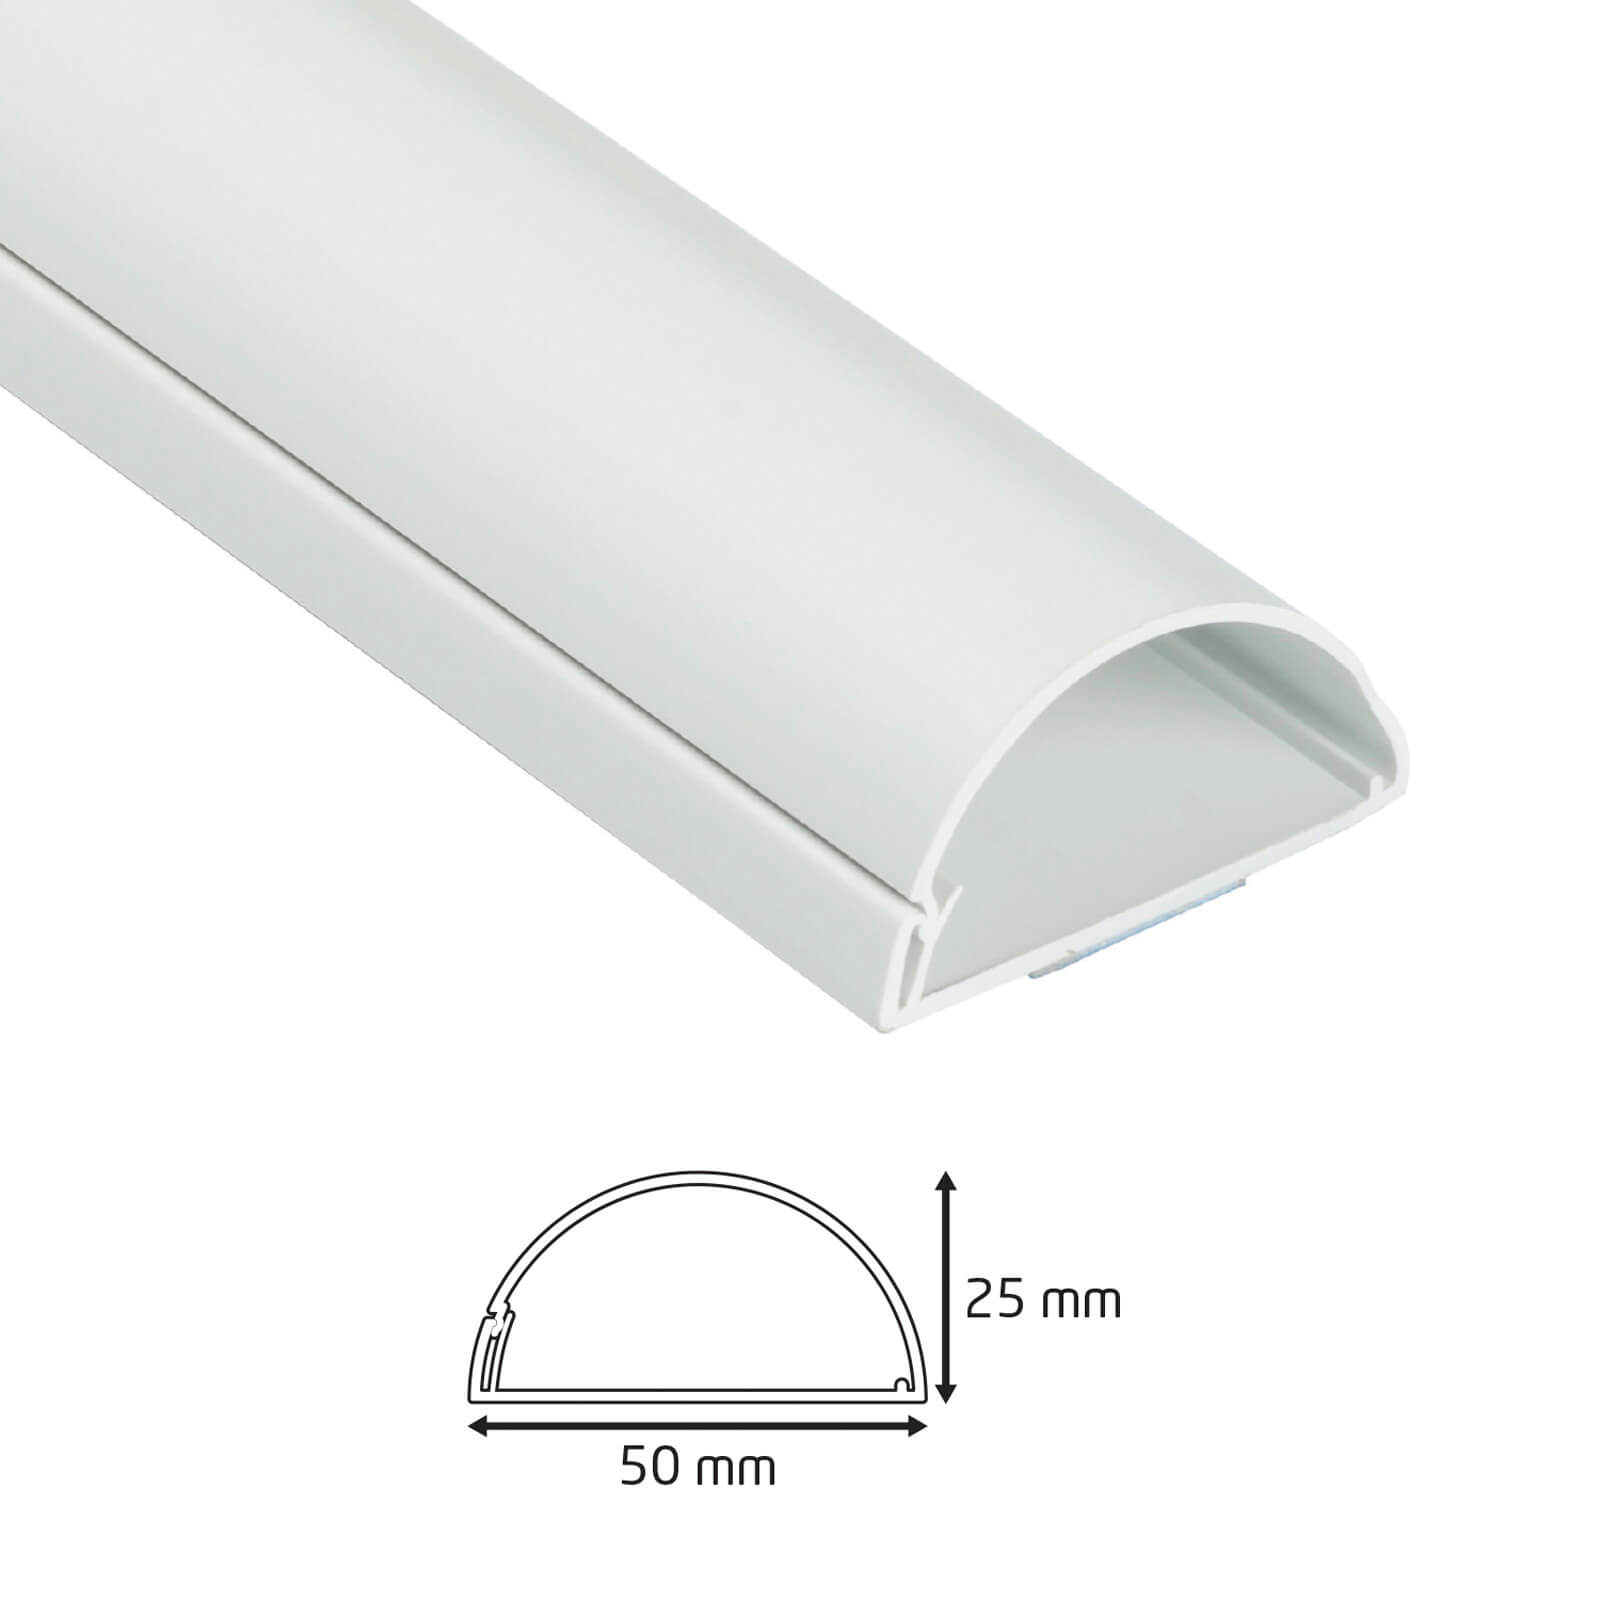 D-Line Maxi Decorative Self-Adhesive Cable Trunking - 50mm x 25mm x 1m, White